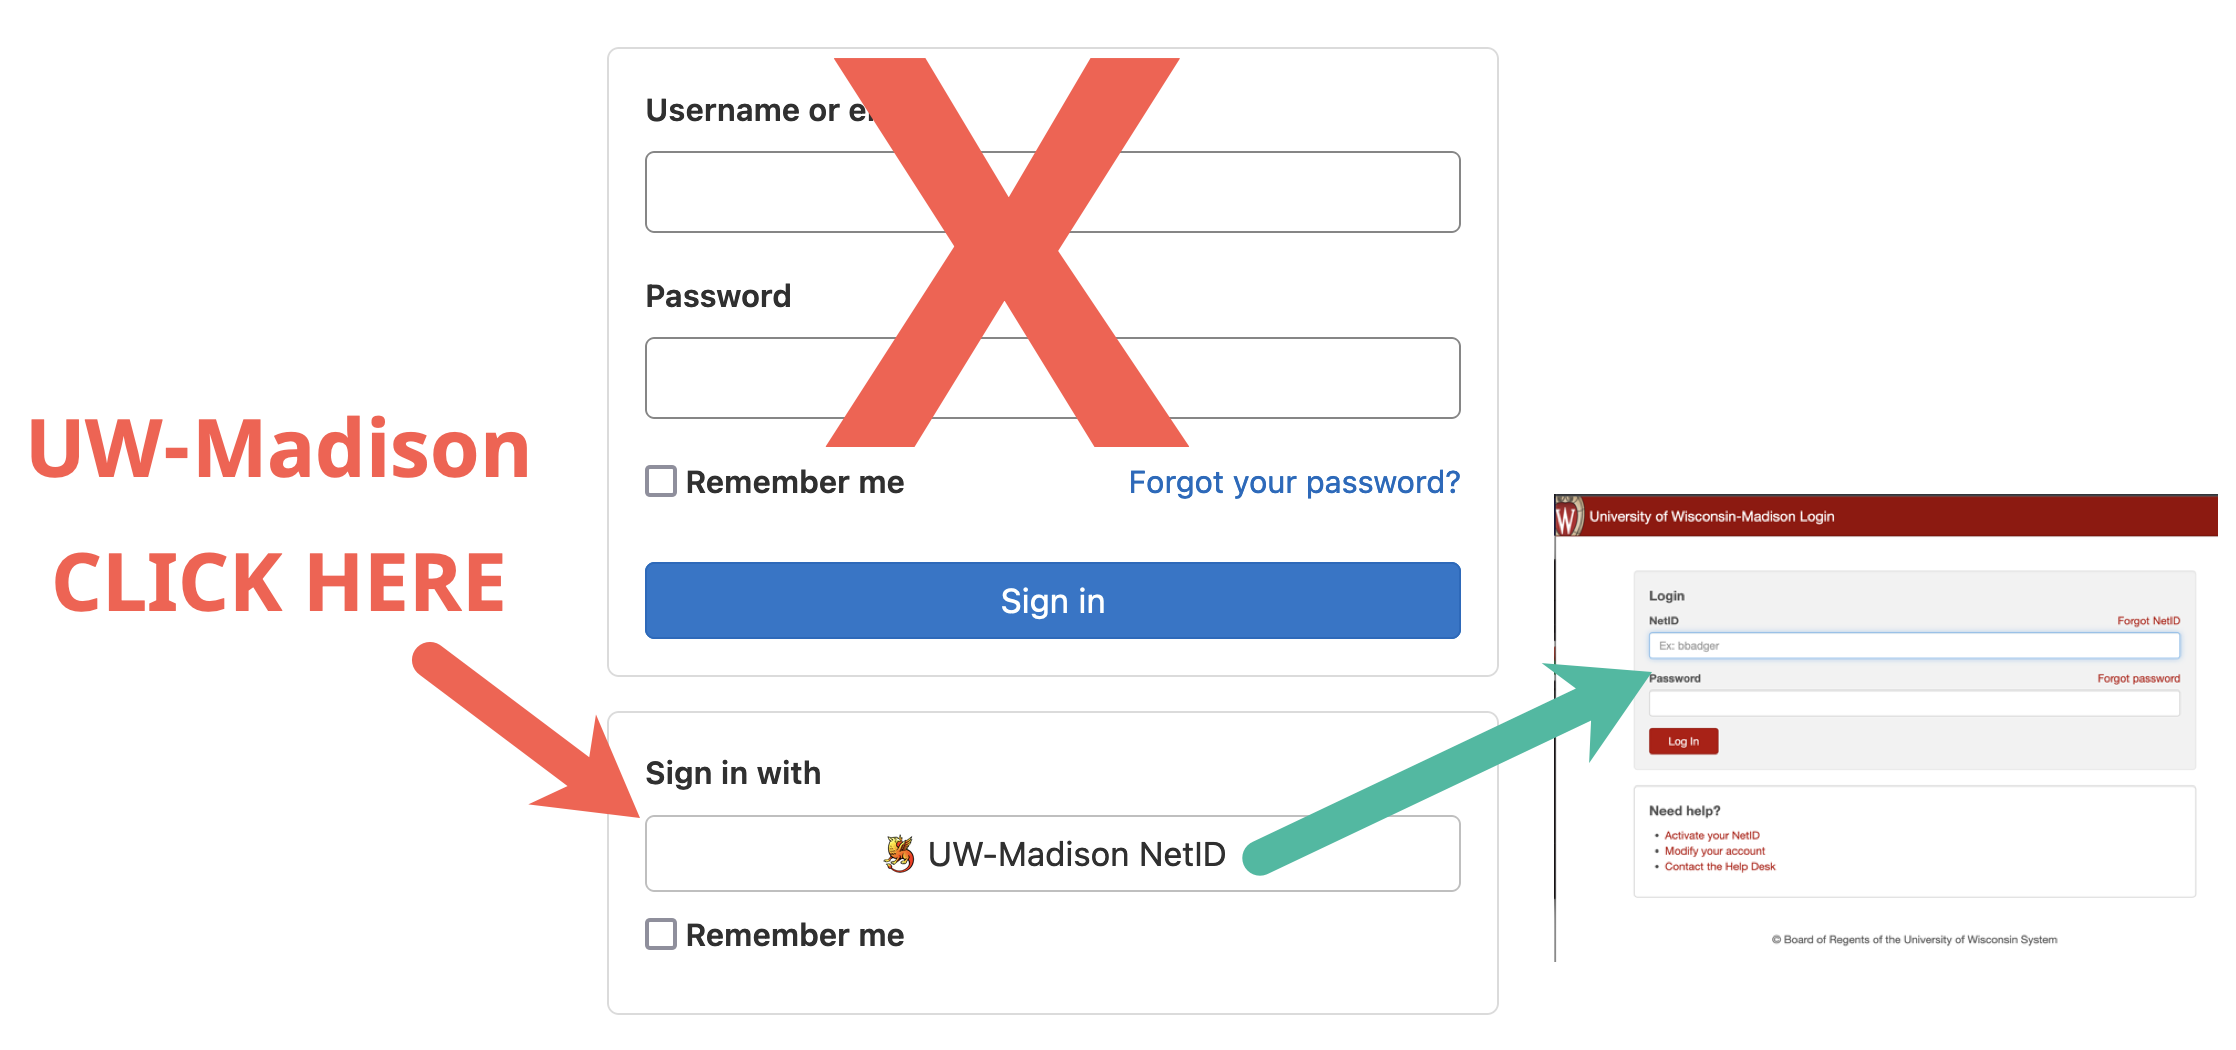 click button labeled UW-Madison NetID which leads to the UW Login screen